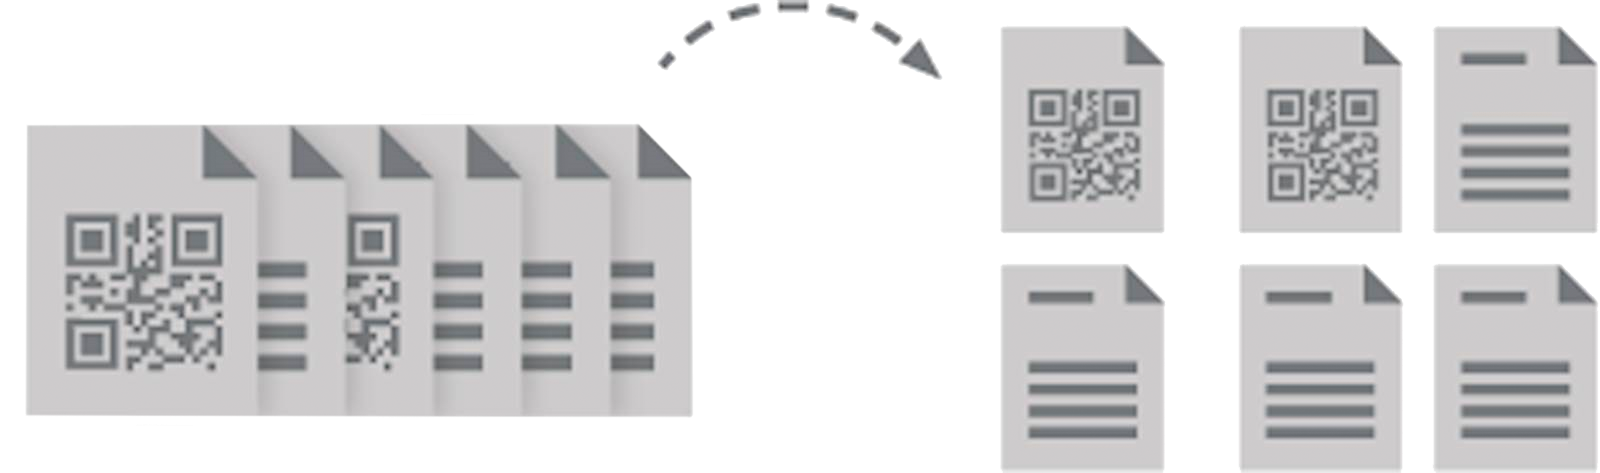 Drivve Image Separate documents Graphic